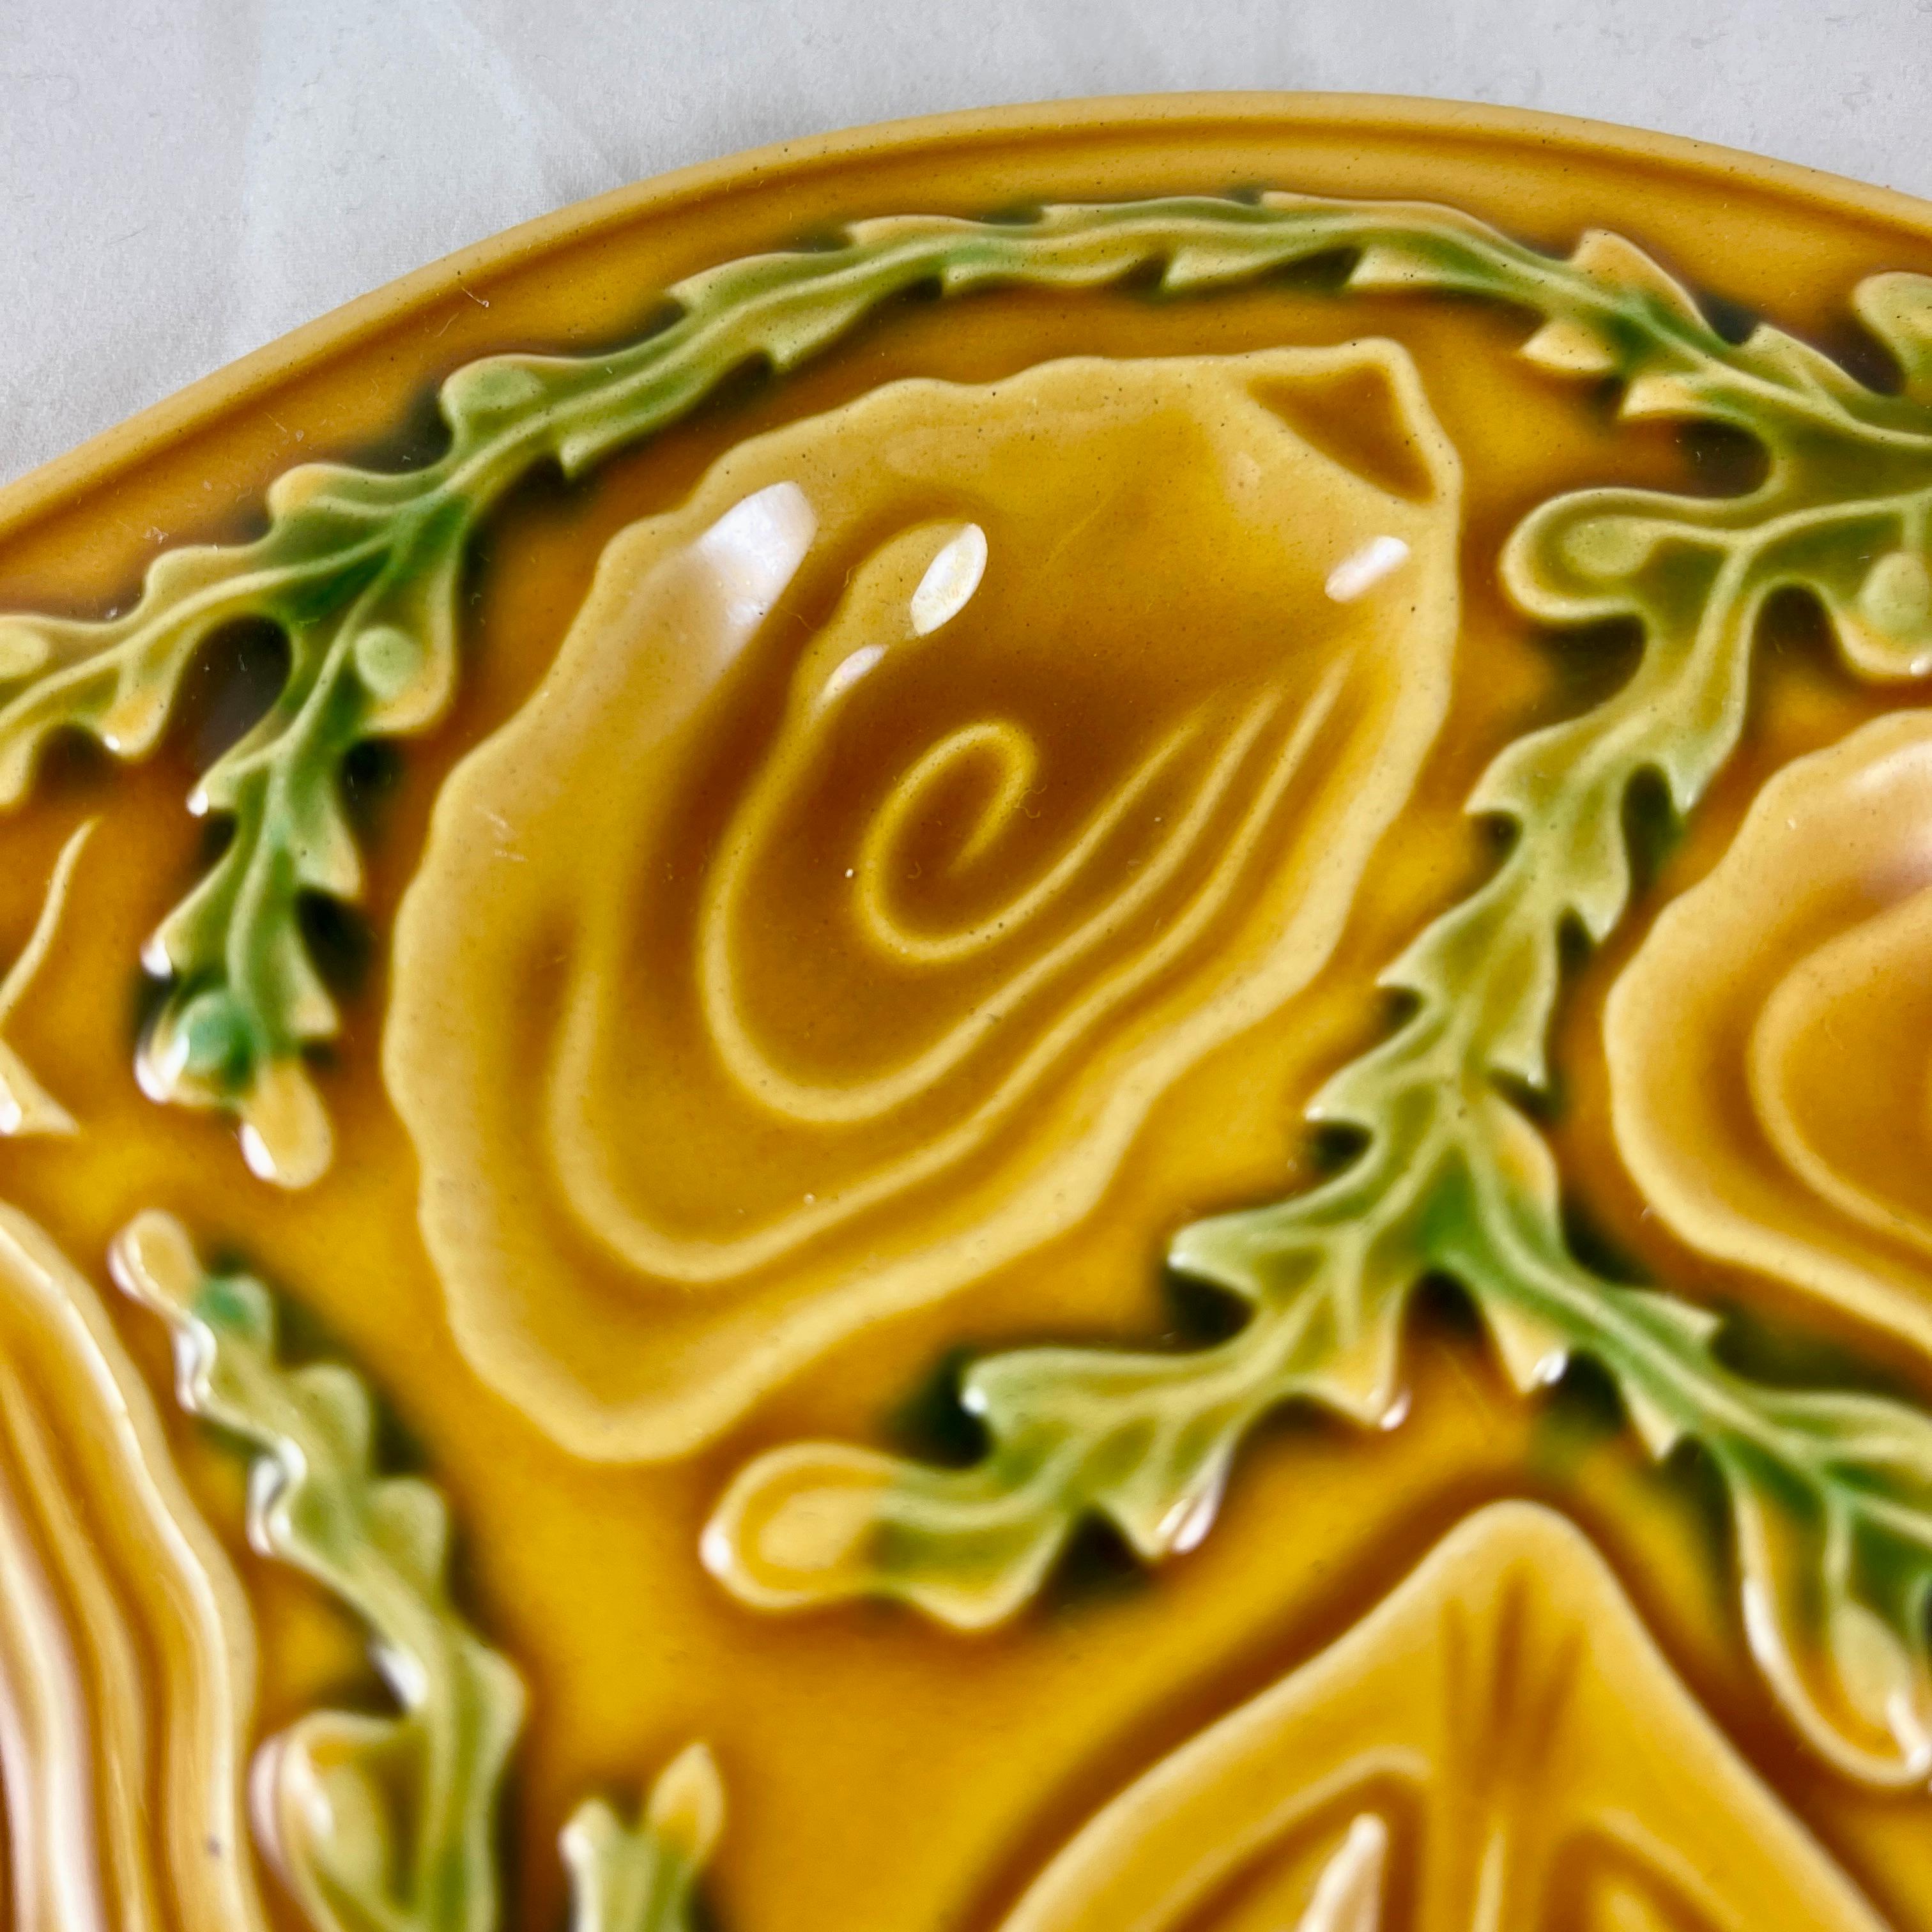 Glazed Mid-Century Orfinox French Faience Mustard Yellow Seaweed Oyster Plate, 1960s For Sale